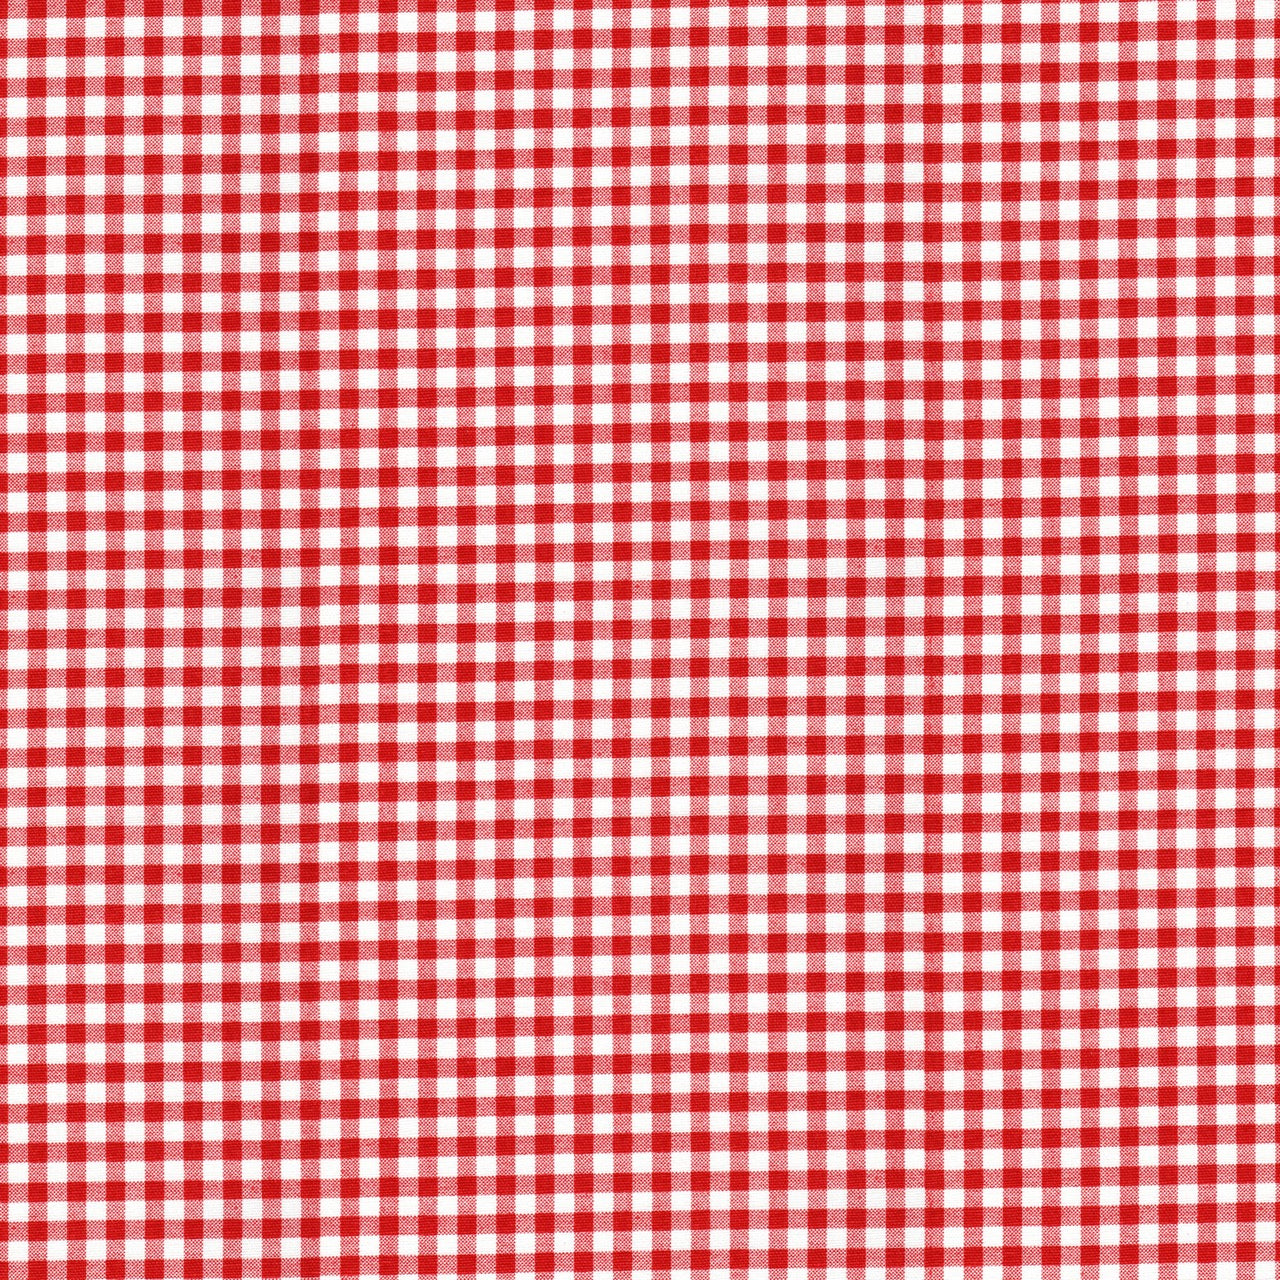 Pinch Pleated Curtains in Lipstick Red Large Gingham Check on White